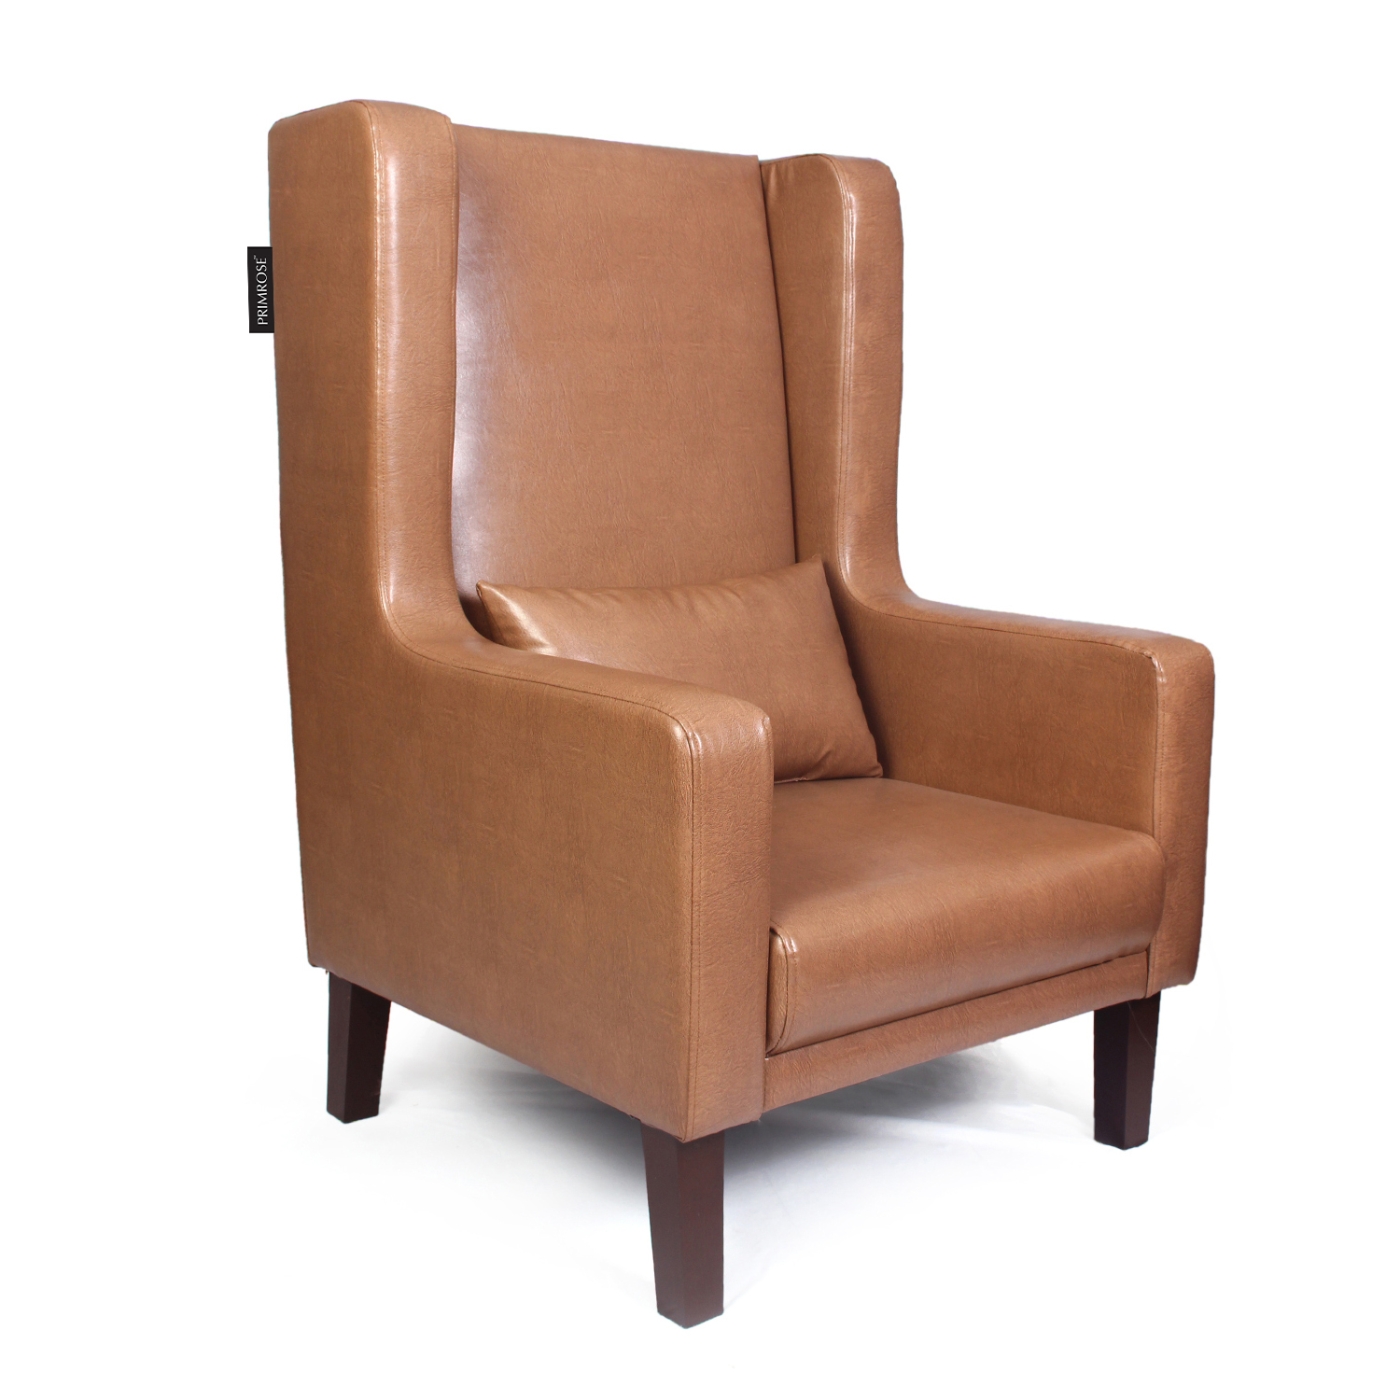 PRIMROSE Chicago High Back Synthetic Leather Fabric Chair - Light Brown  